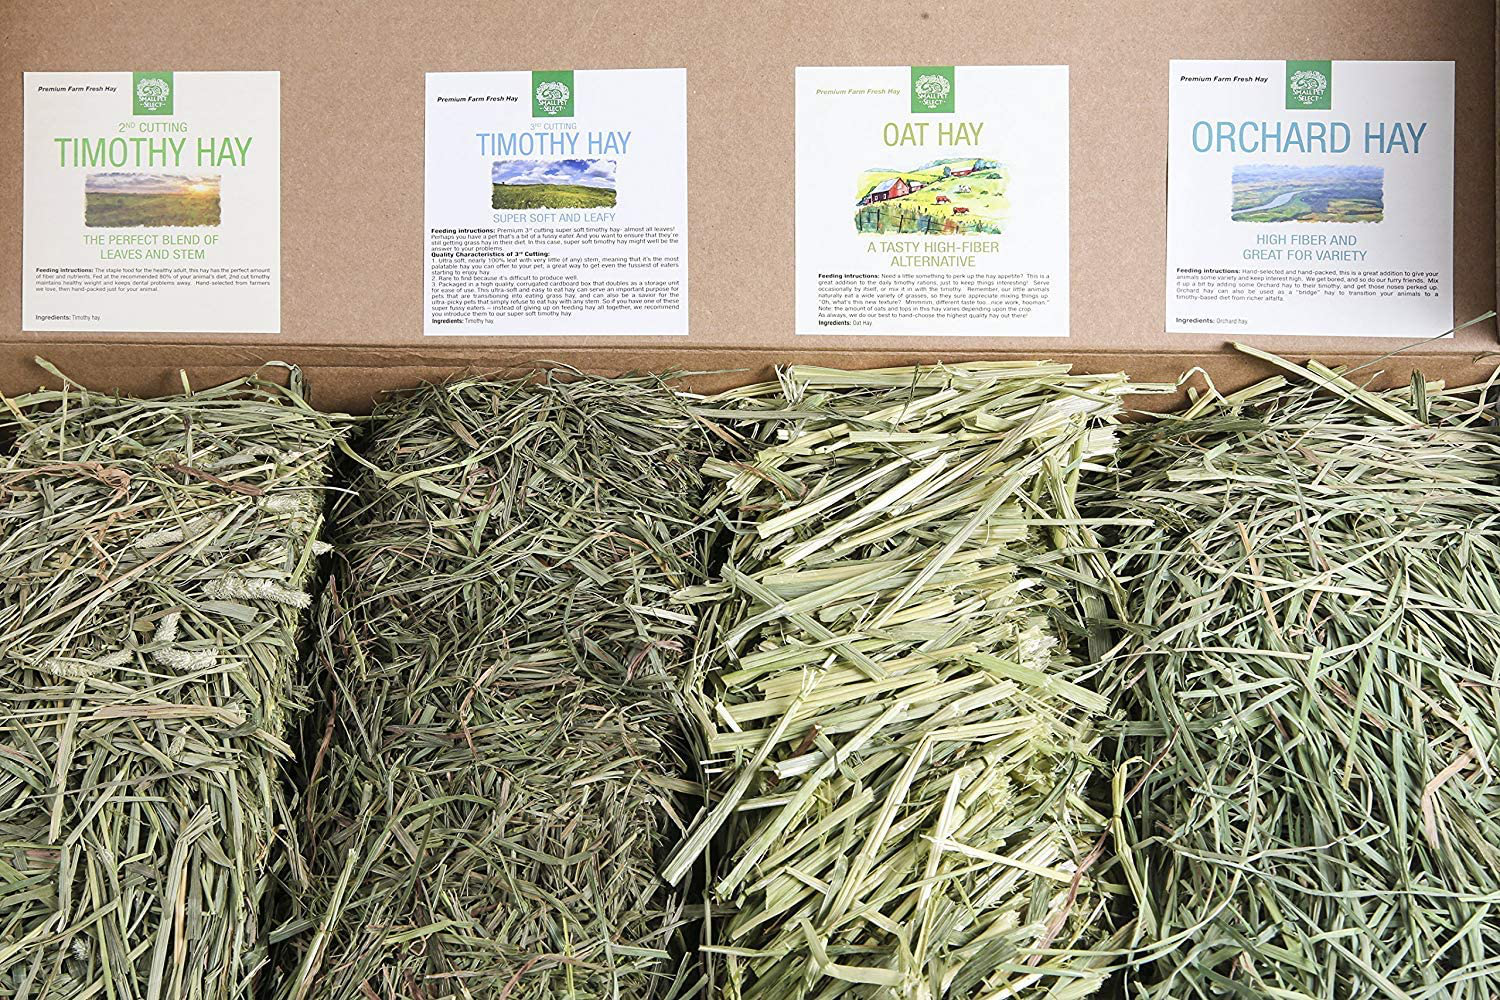 Small Pet Select-Sampler Box, 2ND Cutting, 3RD Cutting Timothy Hay, Oat Hay, & Orchard Hay